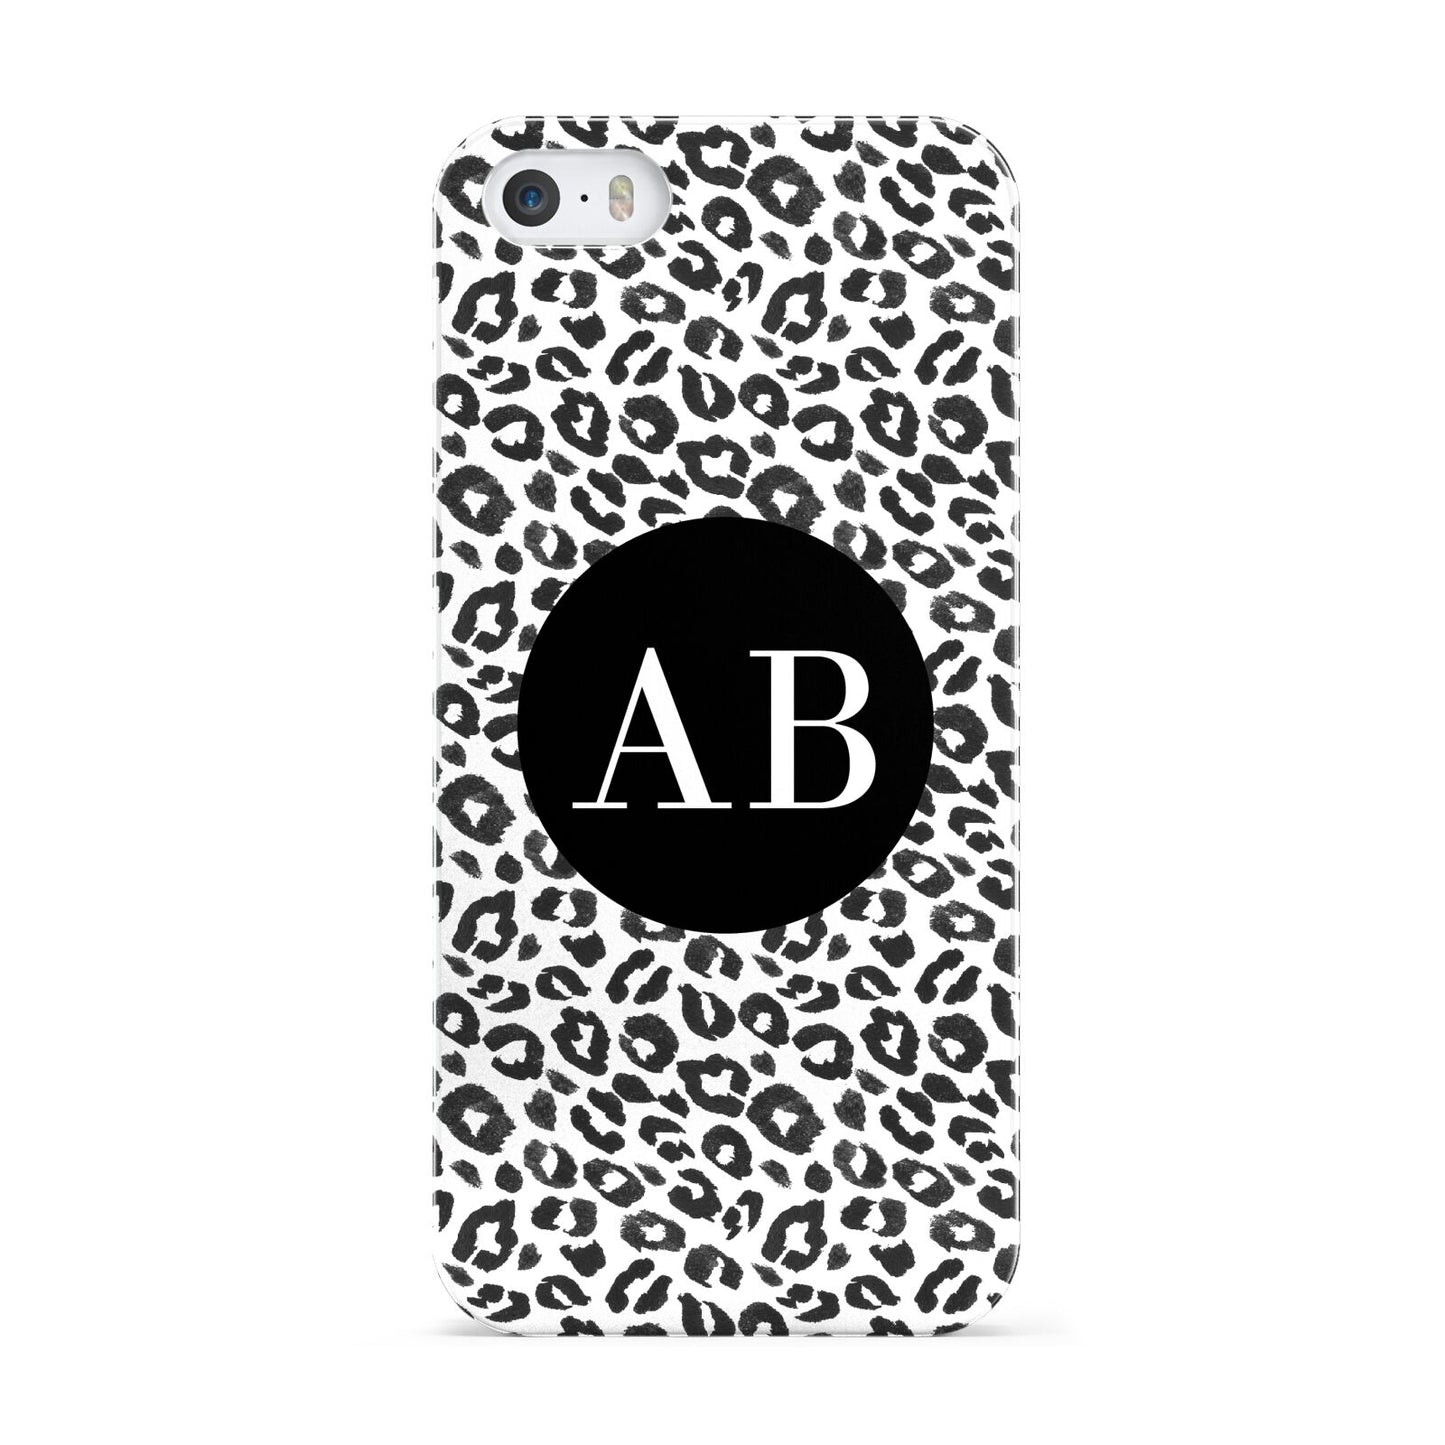 Leopard Print Black and White Apple iPhone 5 Case